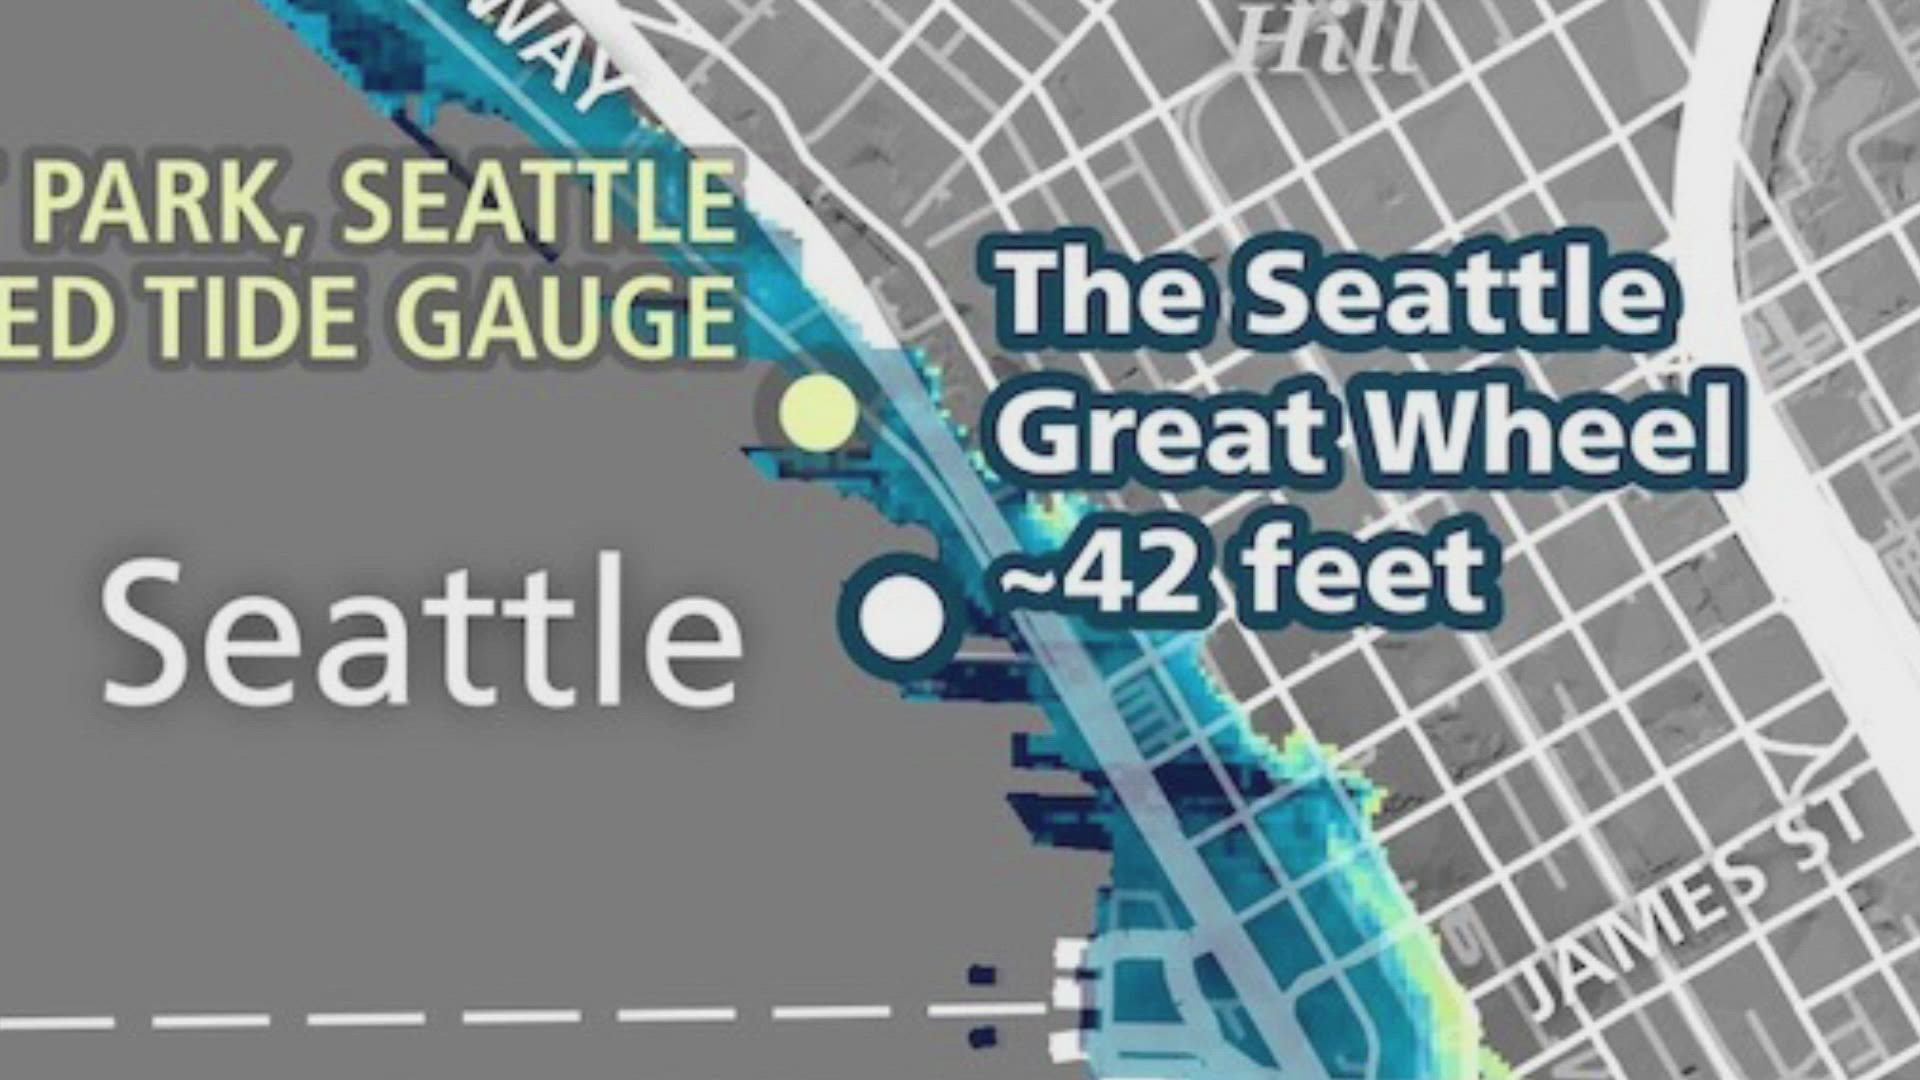 Commissioner of Public Lands Hilary Franz joined KING 5 Mornings to talk about a study showing how tsunami waves would impact Seattle after a magnitude 7 earthquake.